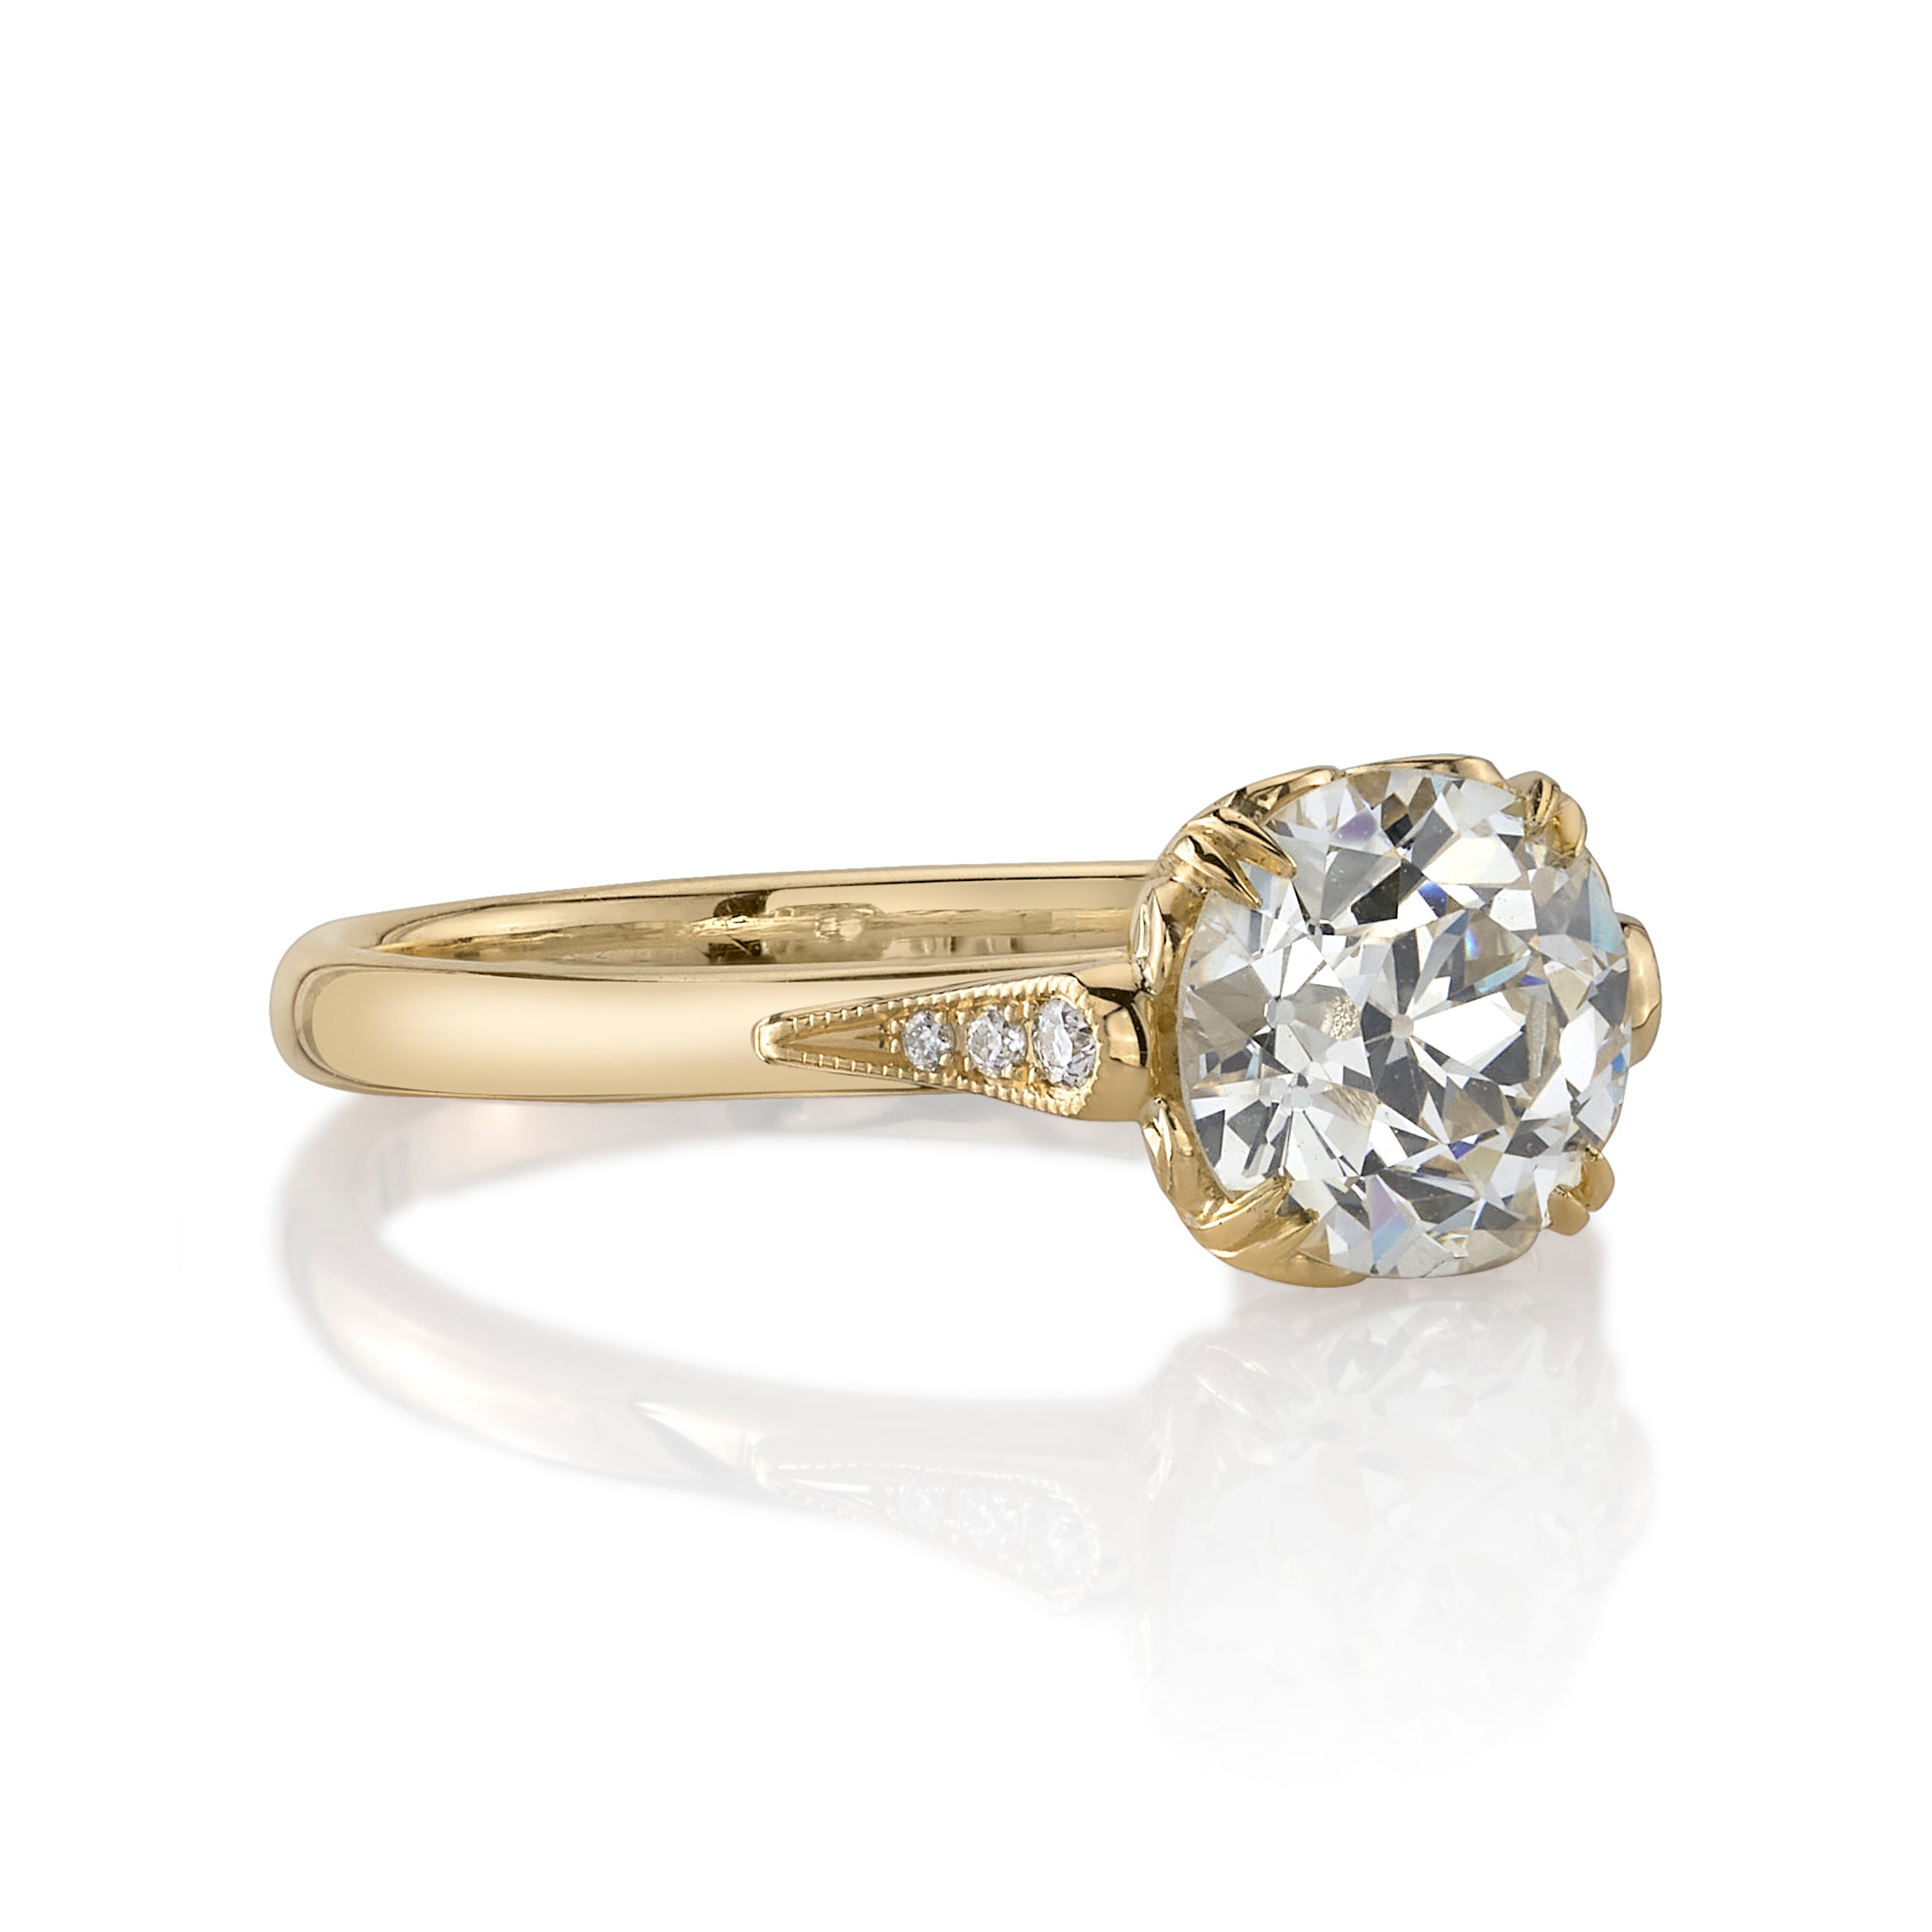 SINGLE STONE SYDNEE WITH DIAMONDS RING featuring 1.26ct N/VS1 GIA certified old European cut diamond with 0.03ctw old European cut accent diamonds set in a handcrafted 18K yellow gold mounting.